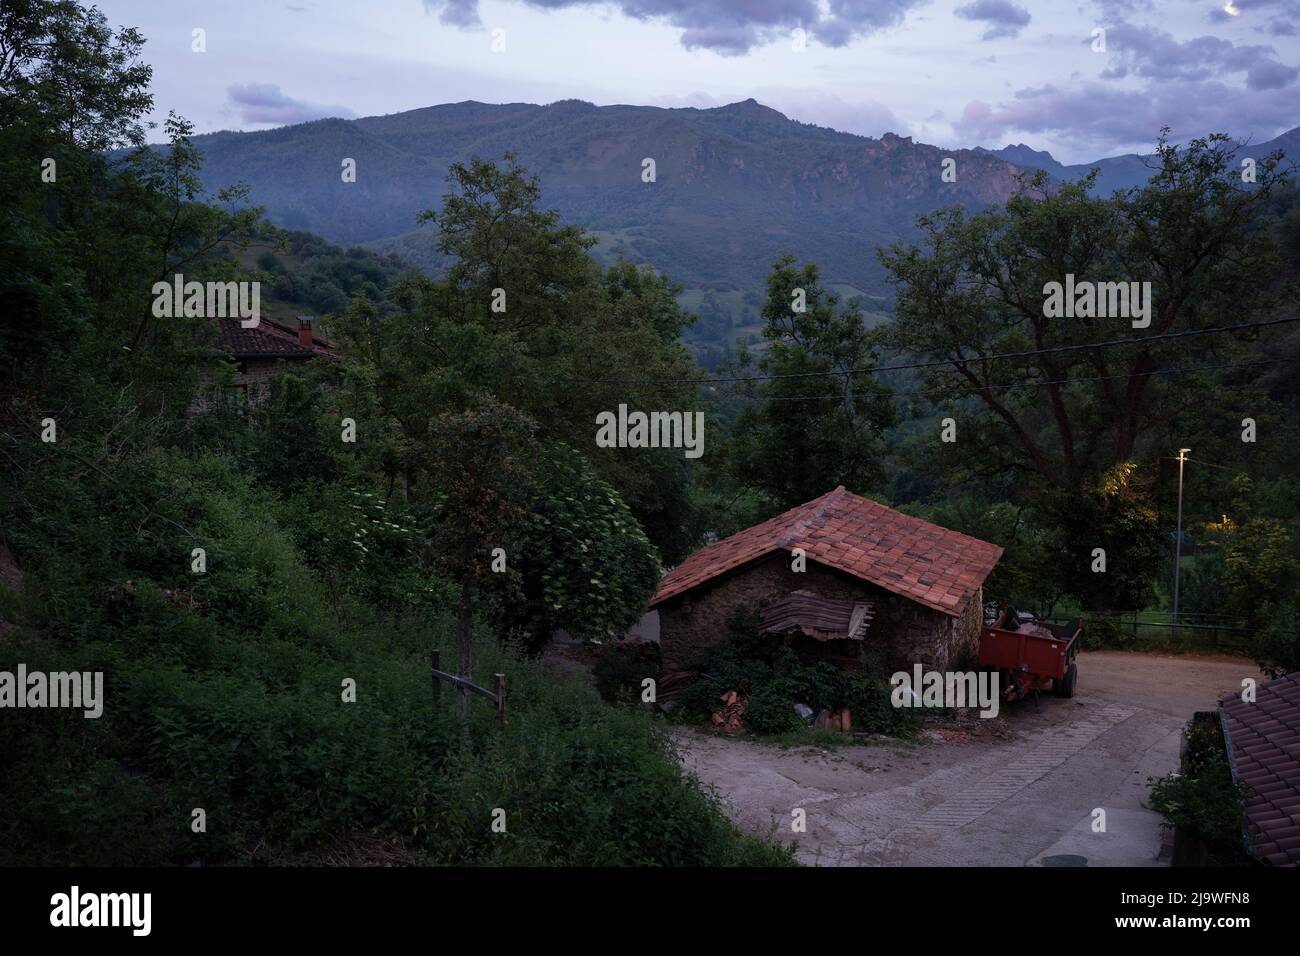 A dawn landscape of farm buildings and mountain foothills in the hamlet of Lon near Potes, a popular tourist gateway for those entering the Spanish Picos de Europa National Park region, on 18th May 2022, Lon, Asturias, Spain. Stock Photo